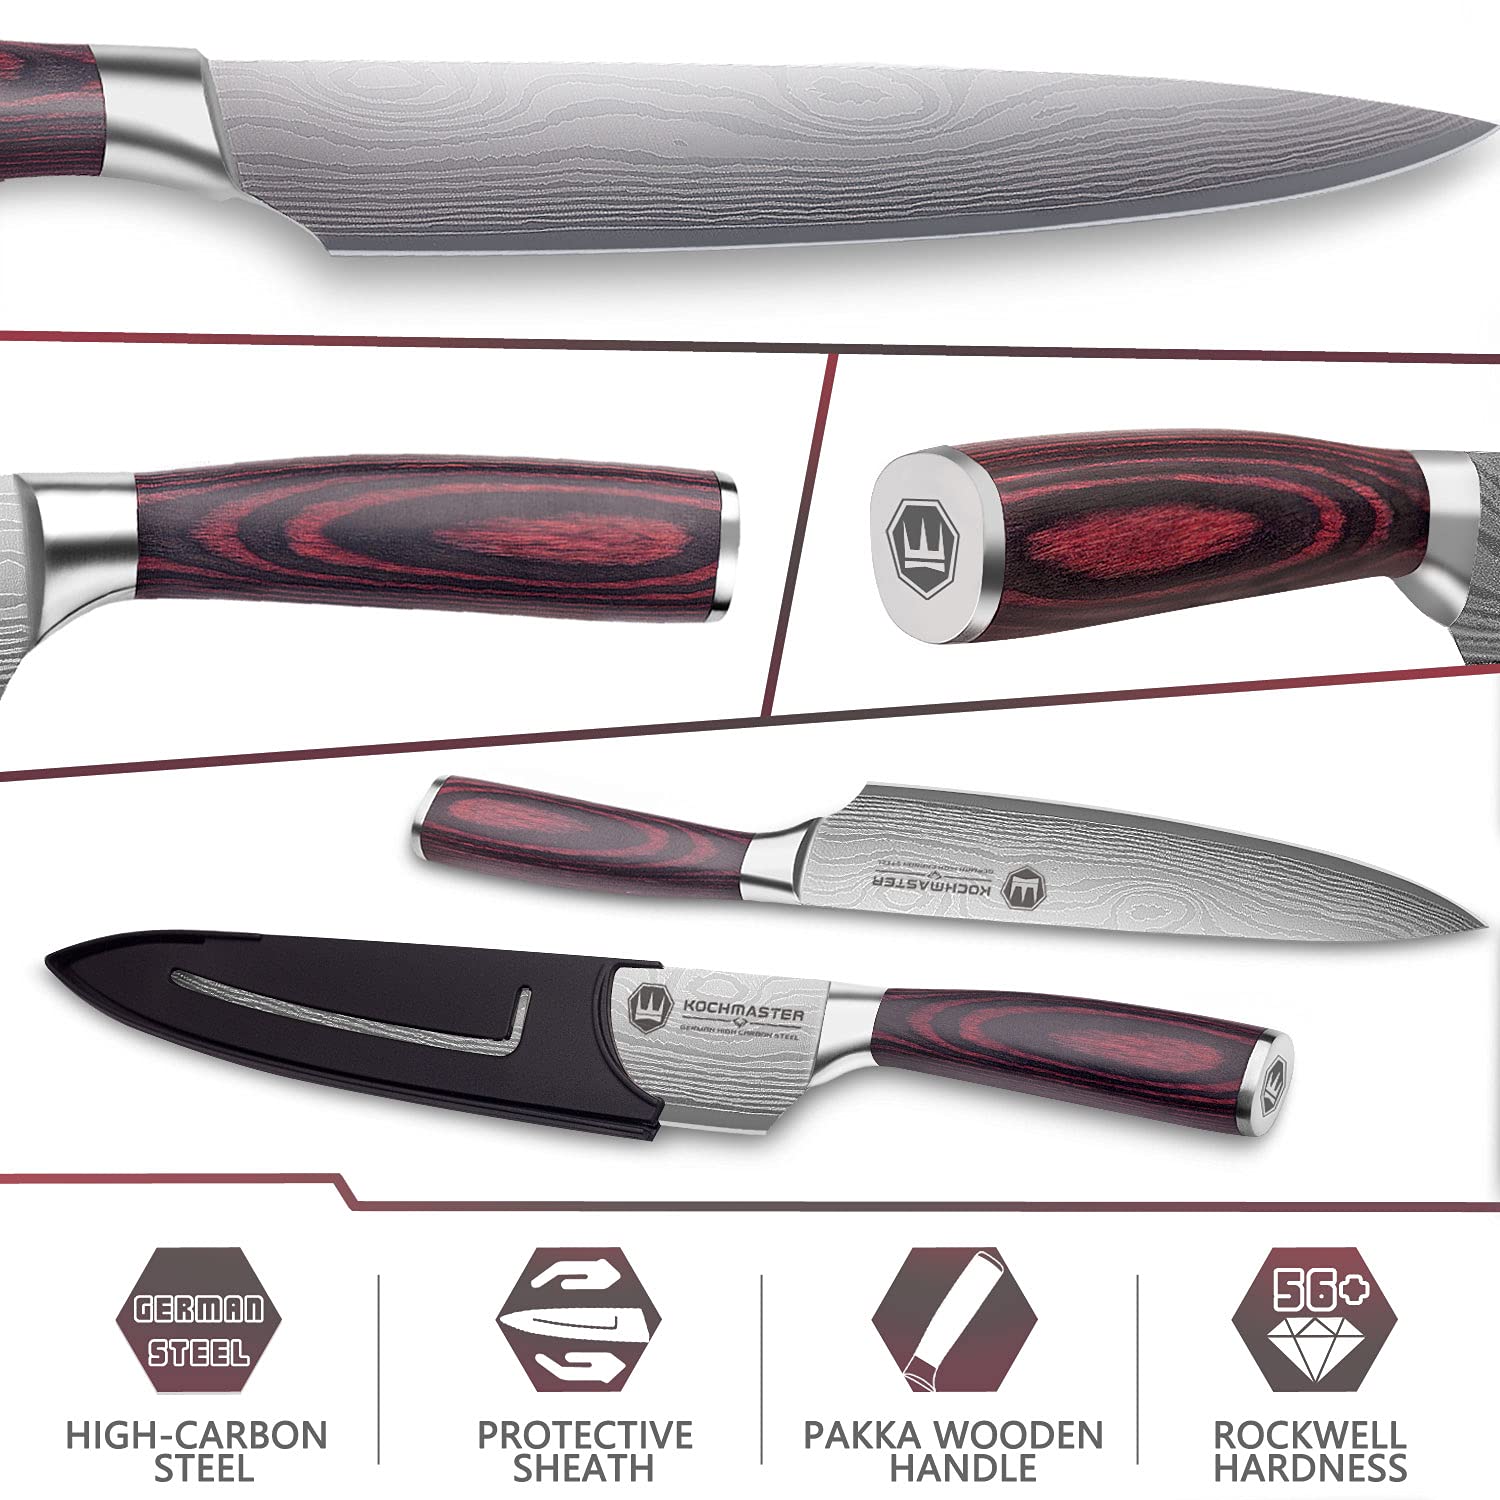 KOCHMASTER Chef Knife Professional 8" ,Kitchen Knife Ultra Sharp with Sheath,Made of High Carbon German Steel and Pakka Wood Handle with Gift Box Packing,The Ideal Choice for Kitchen & Restaurant